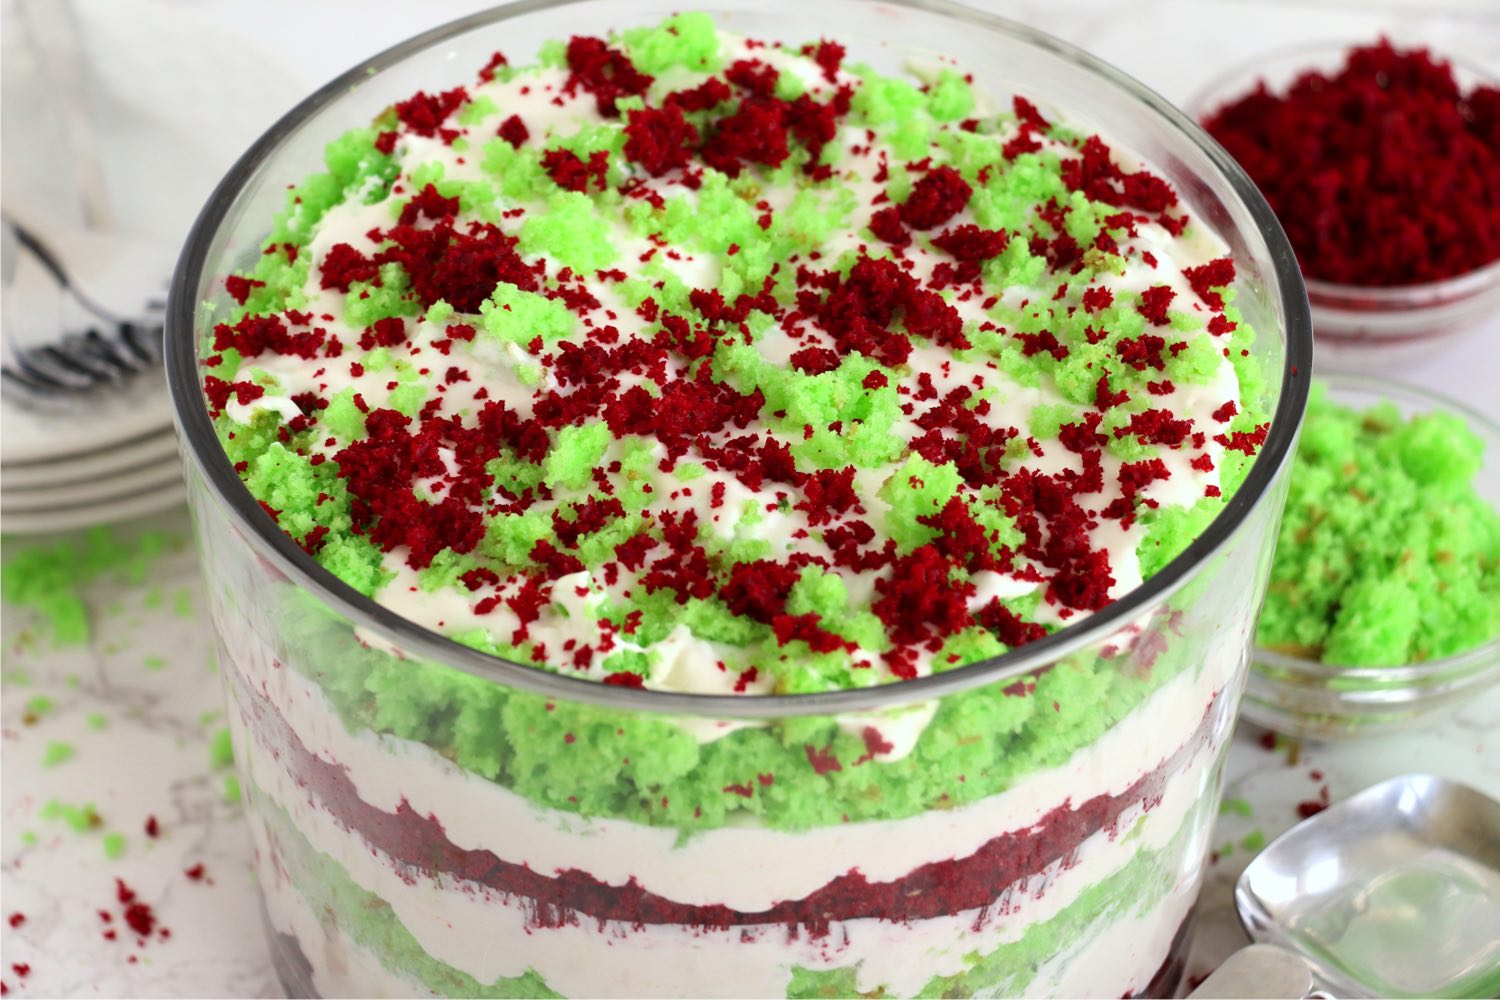 red, white and green layer dessert